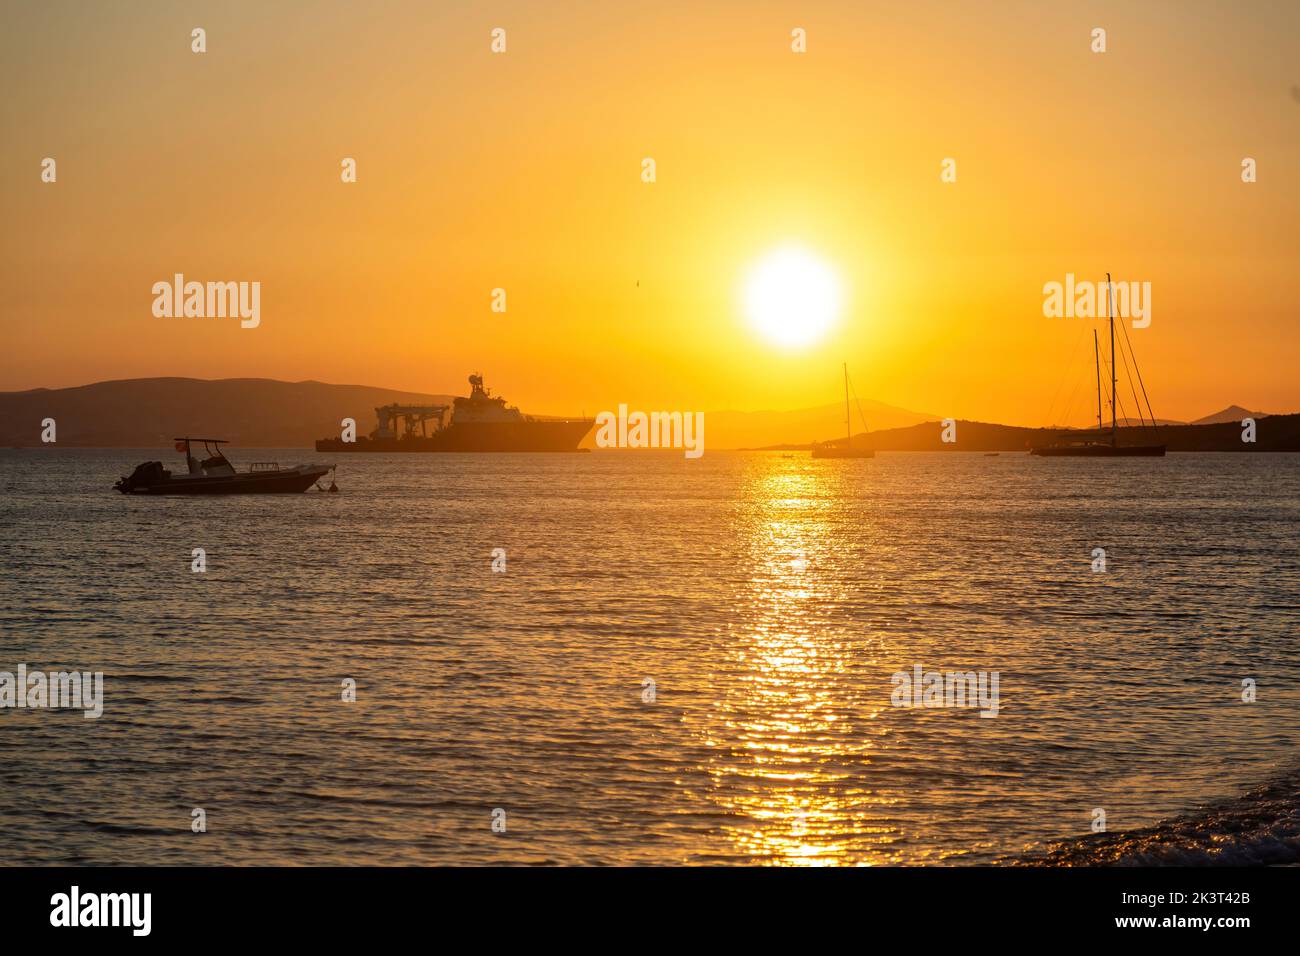 Naxos island, sunset over colorful Aegean sea, Cyclades destination Greece. Sundown with orange and gold yellow beams colors sky background and boats Stock Photo